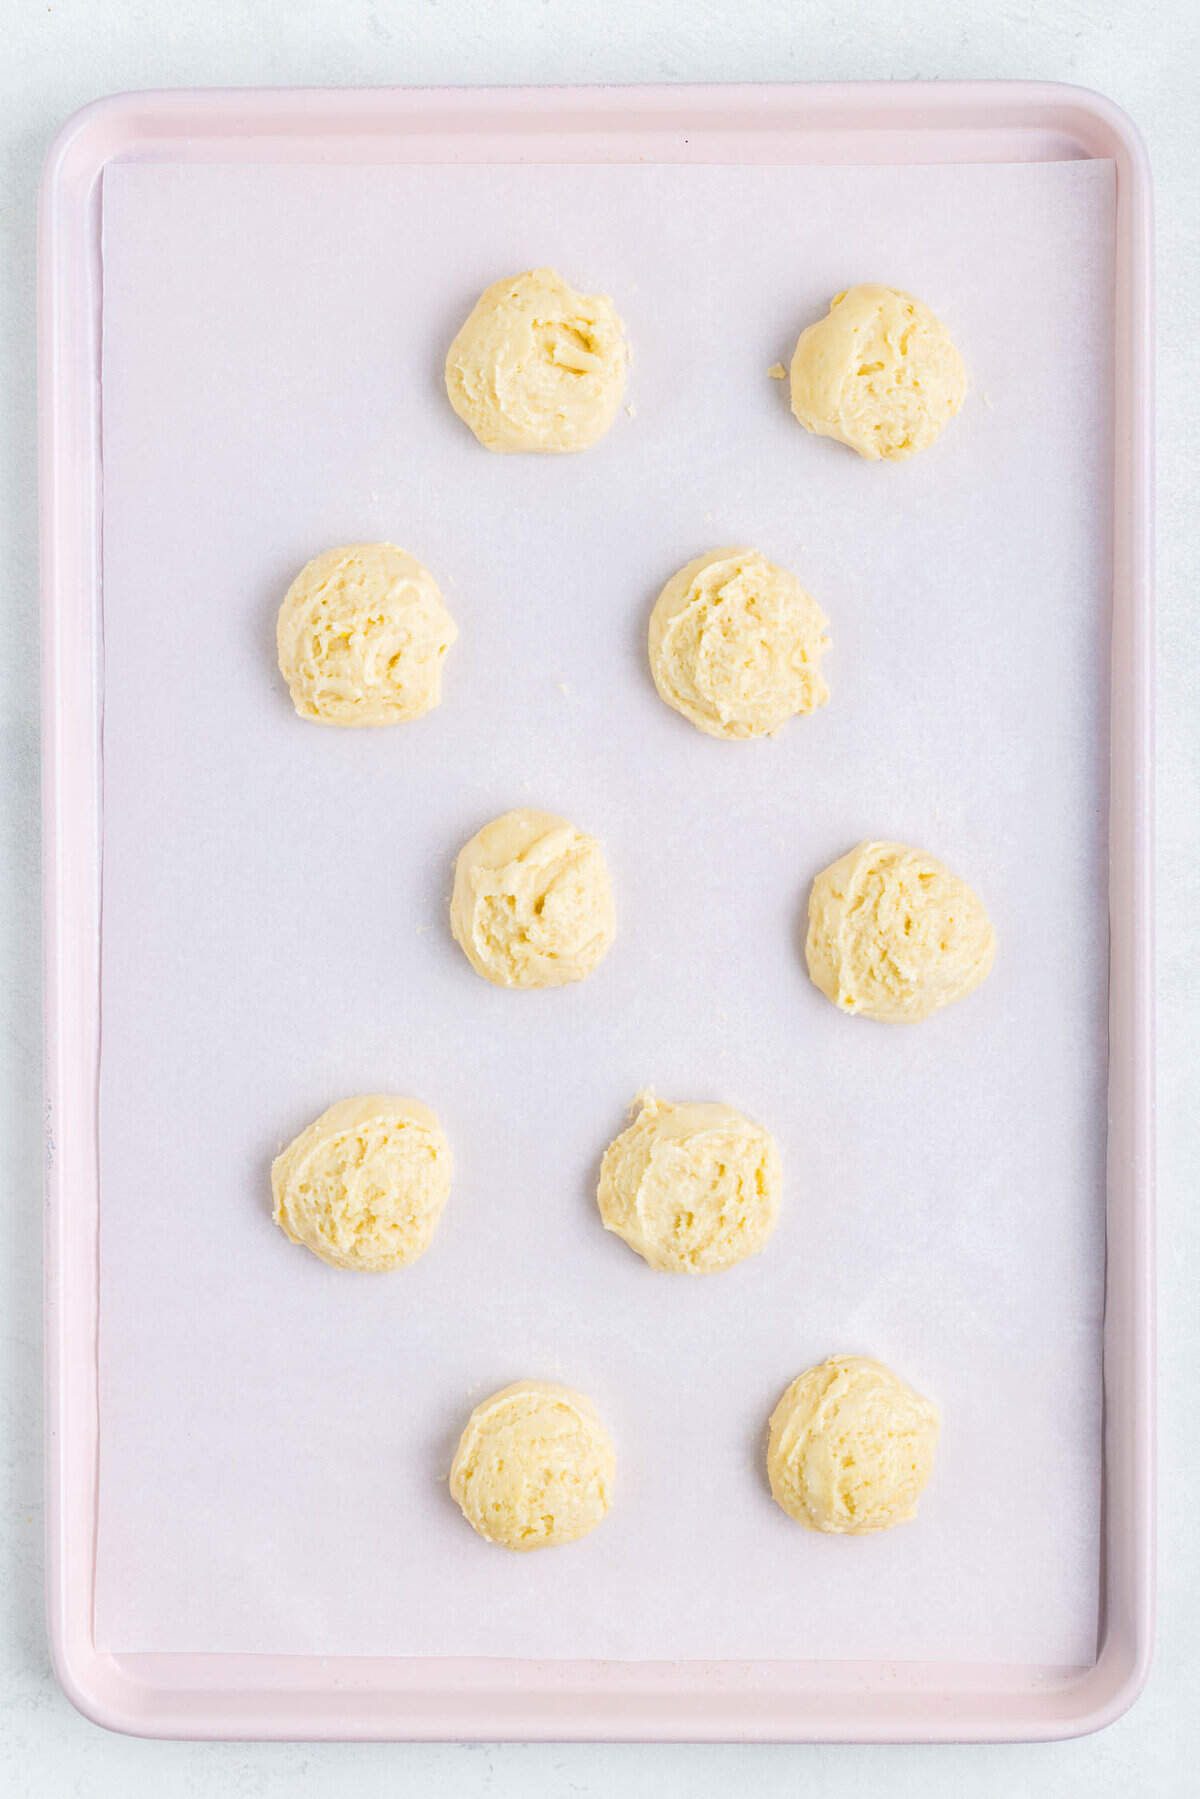 Using a medium cookie scoop drop the cookie dough onto the parchment lined cookies sheets. Bake according to package.